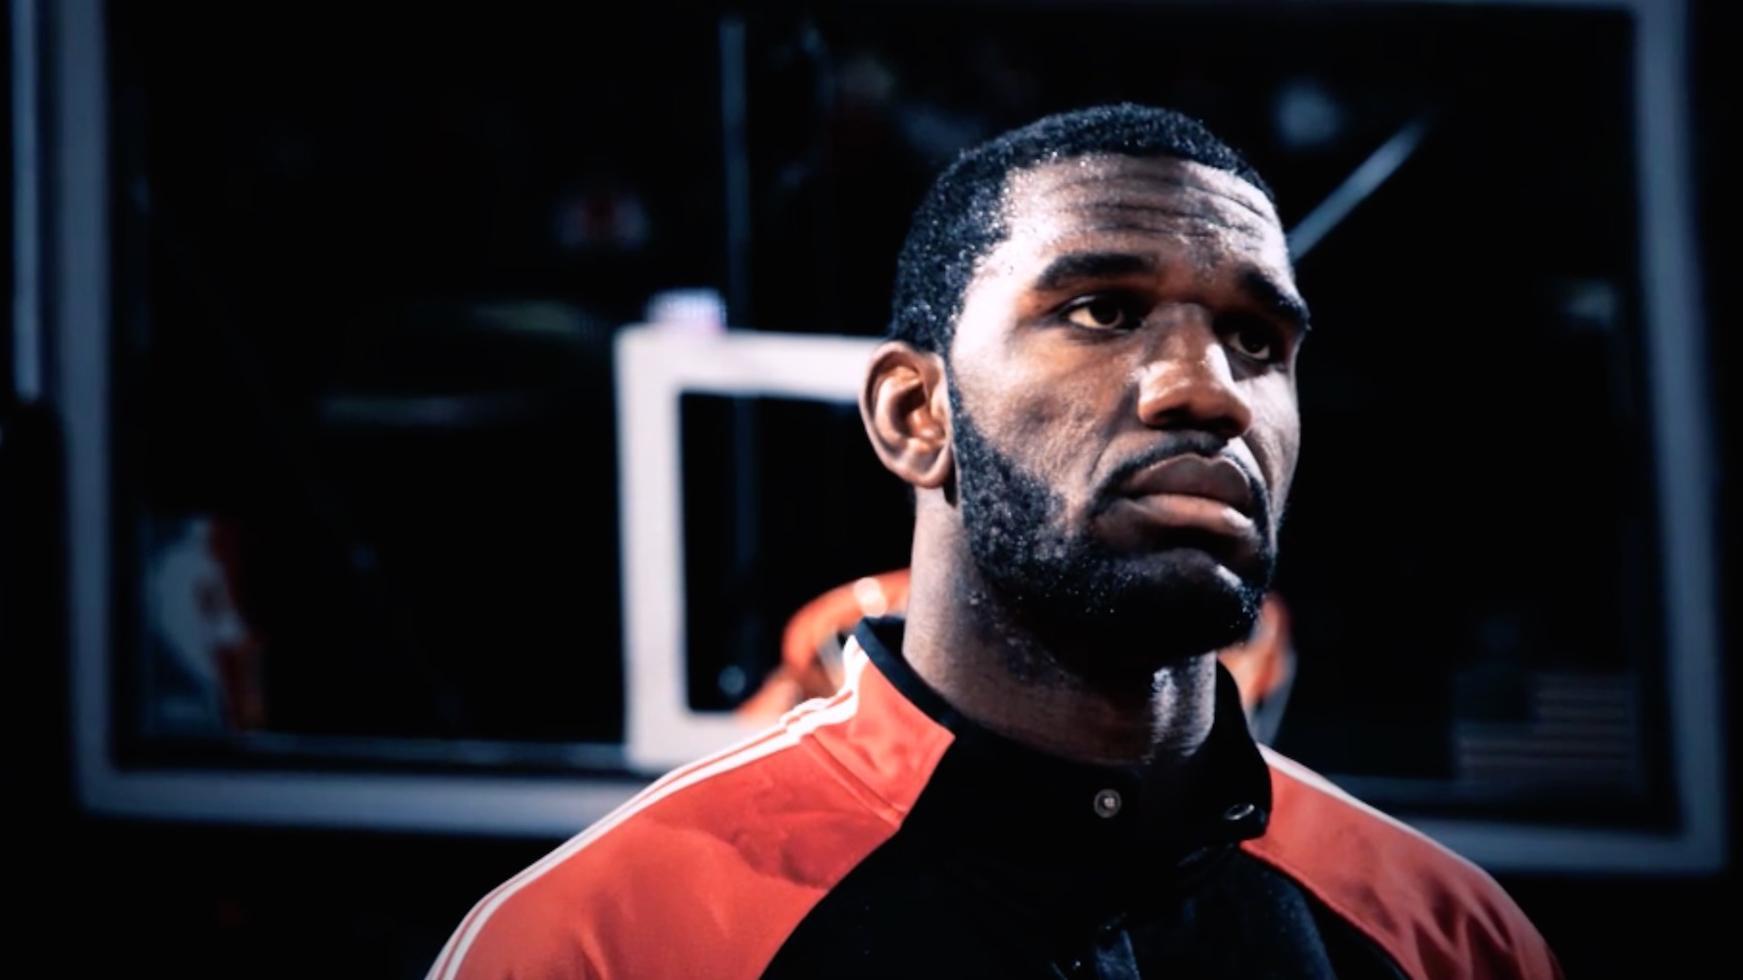 Greg Oden of Miami Heat likely to be cleared for full practice, sources say  - ESPN